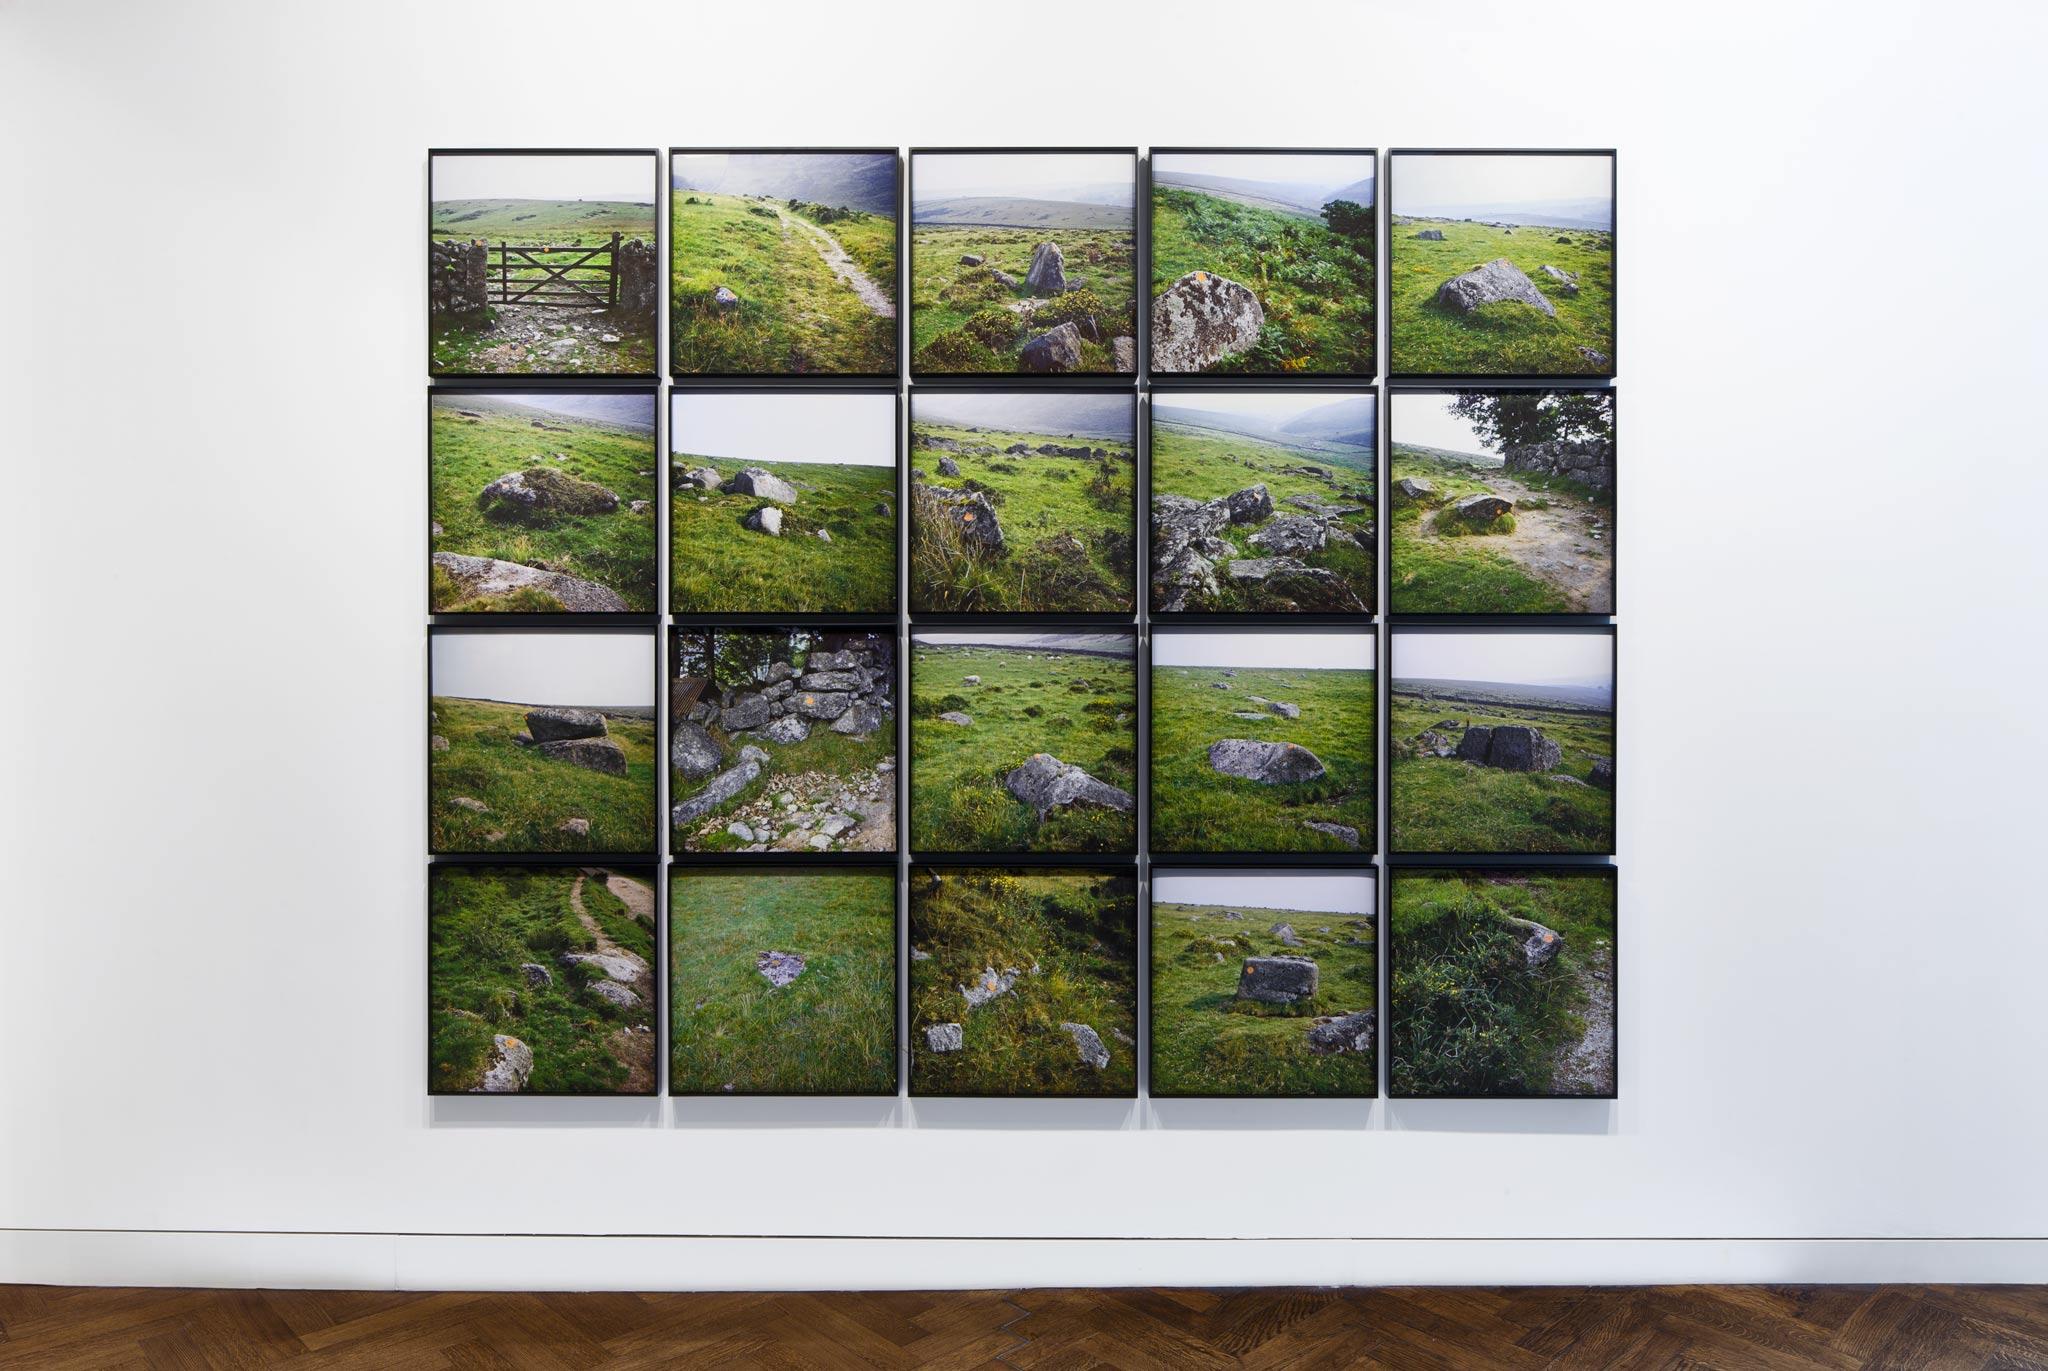 a series of twenty framed photographs on a wall. The images feature an orange dot painted on rocks in a verdant landscape 